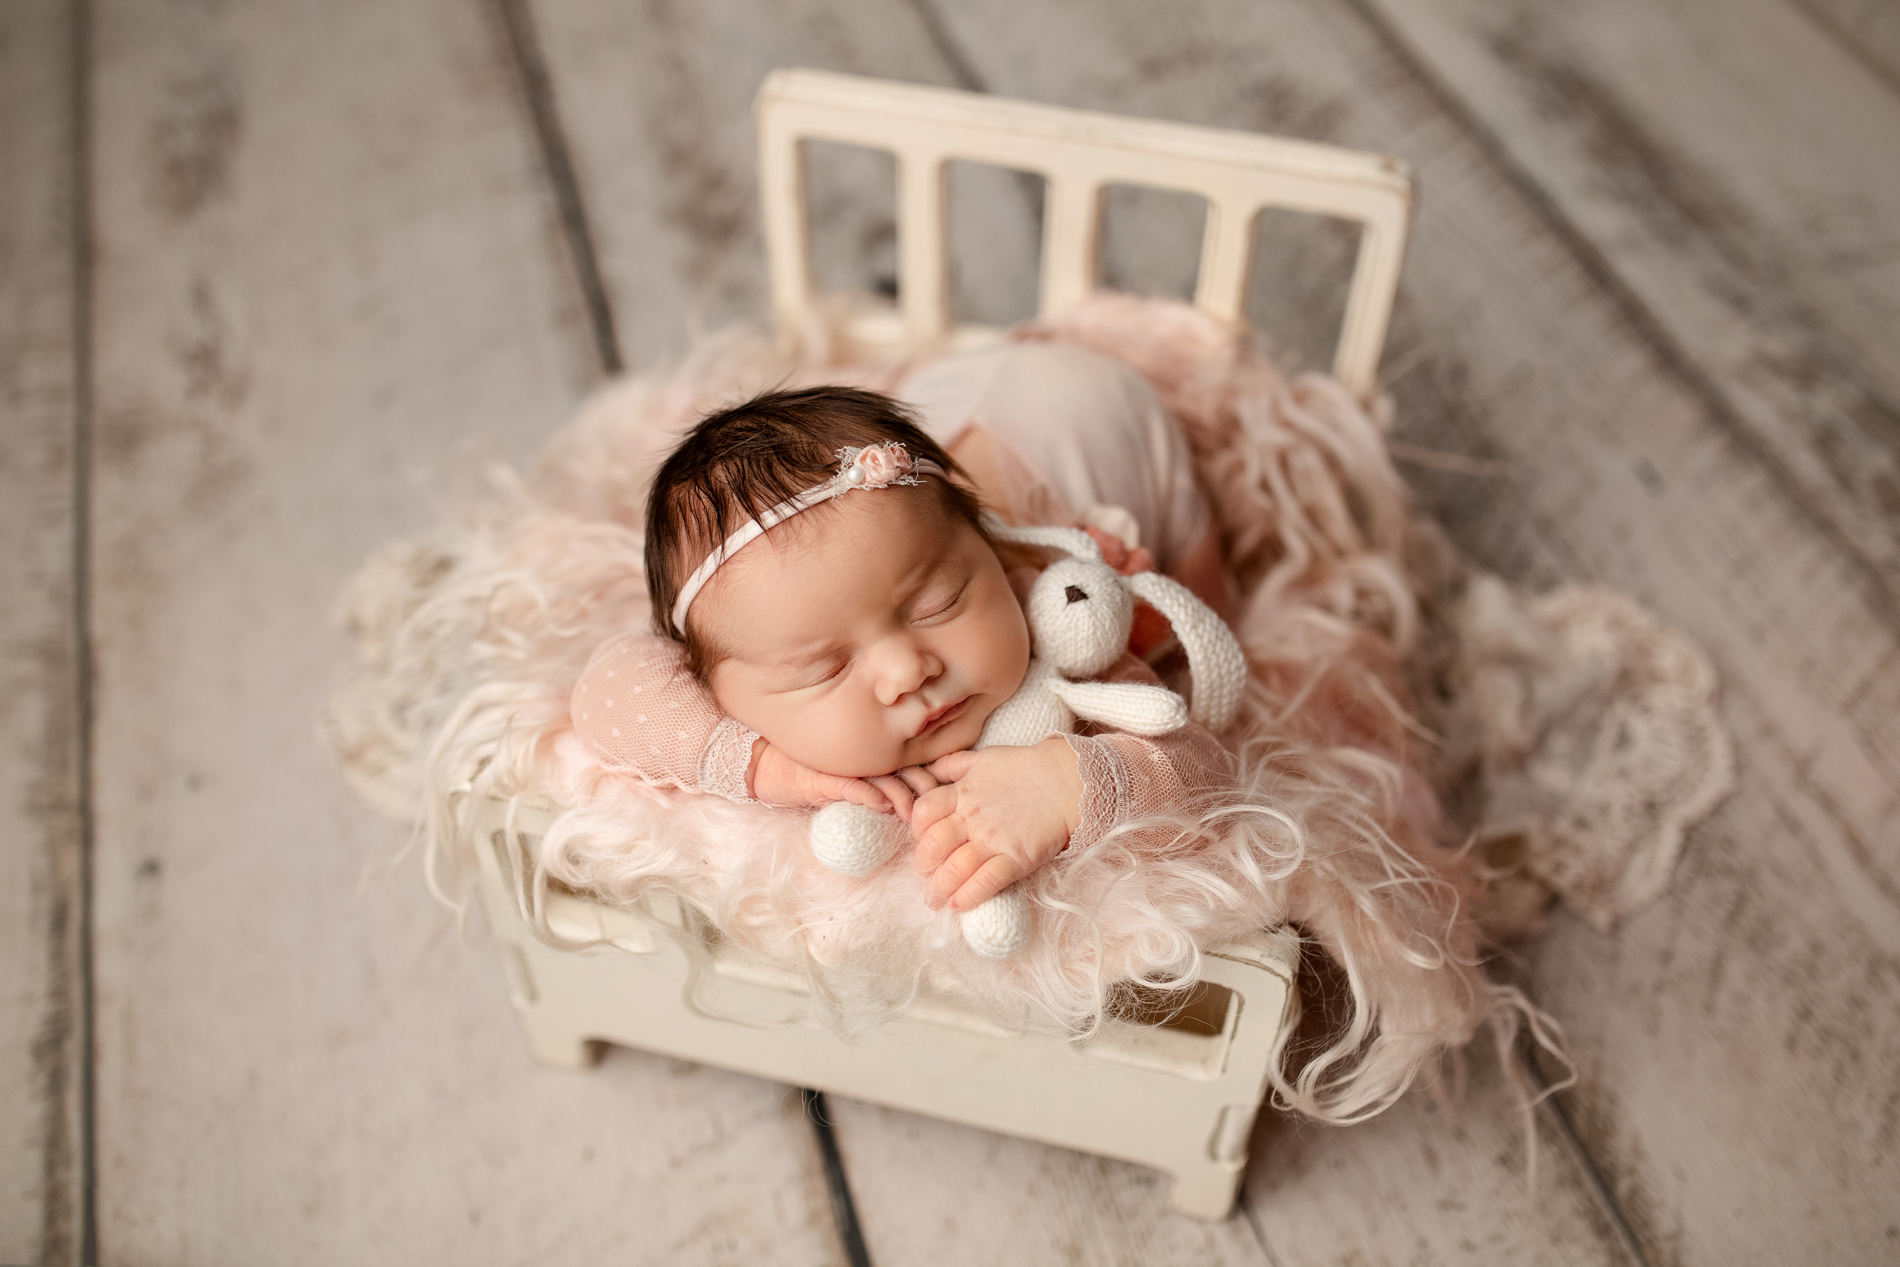 Newborn Photographer, a baby lays sleeping a small wooden dollhouse baby bed,